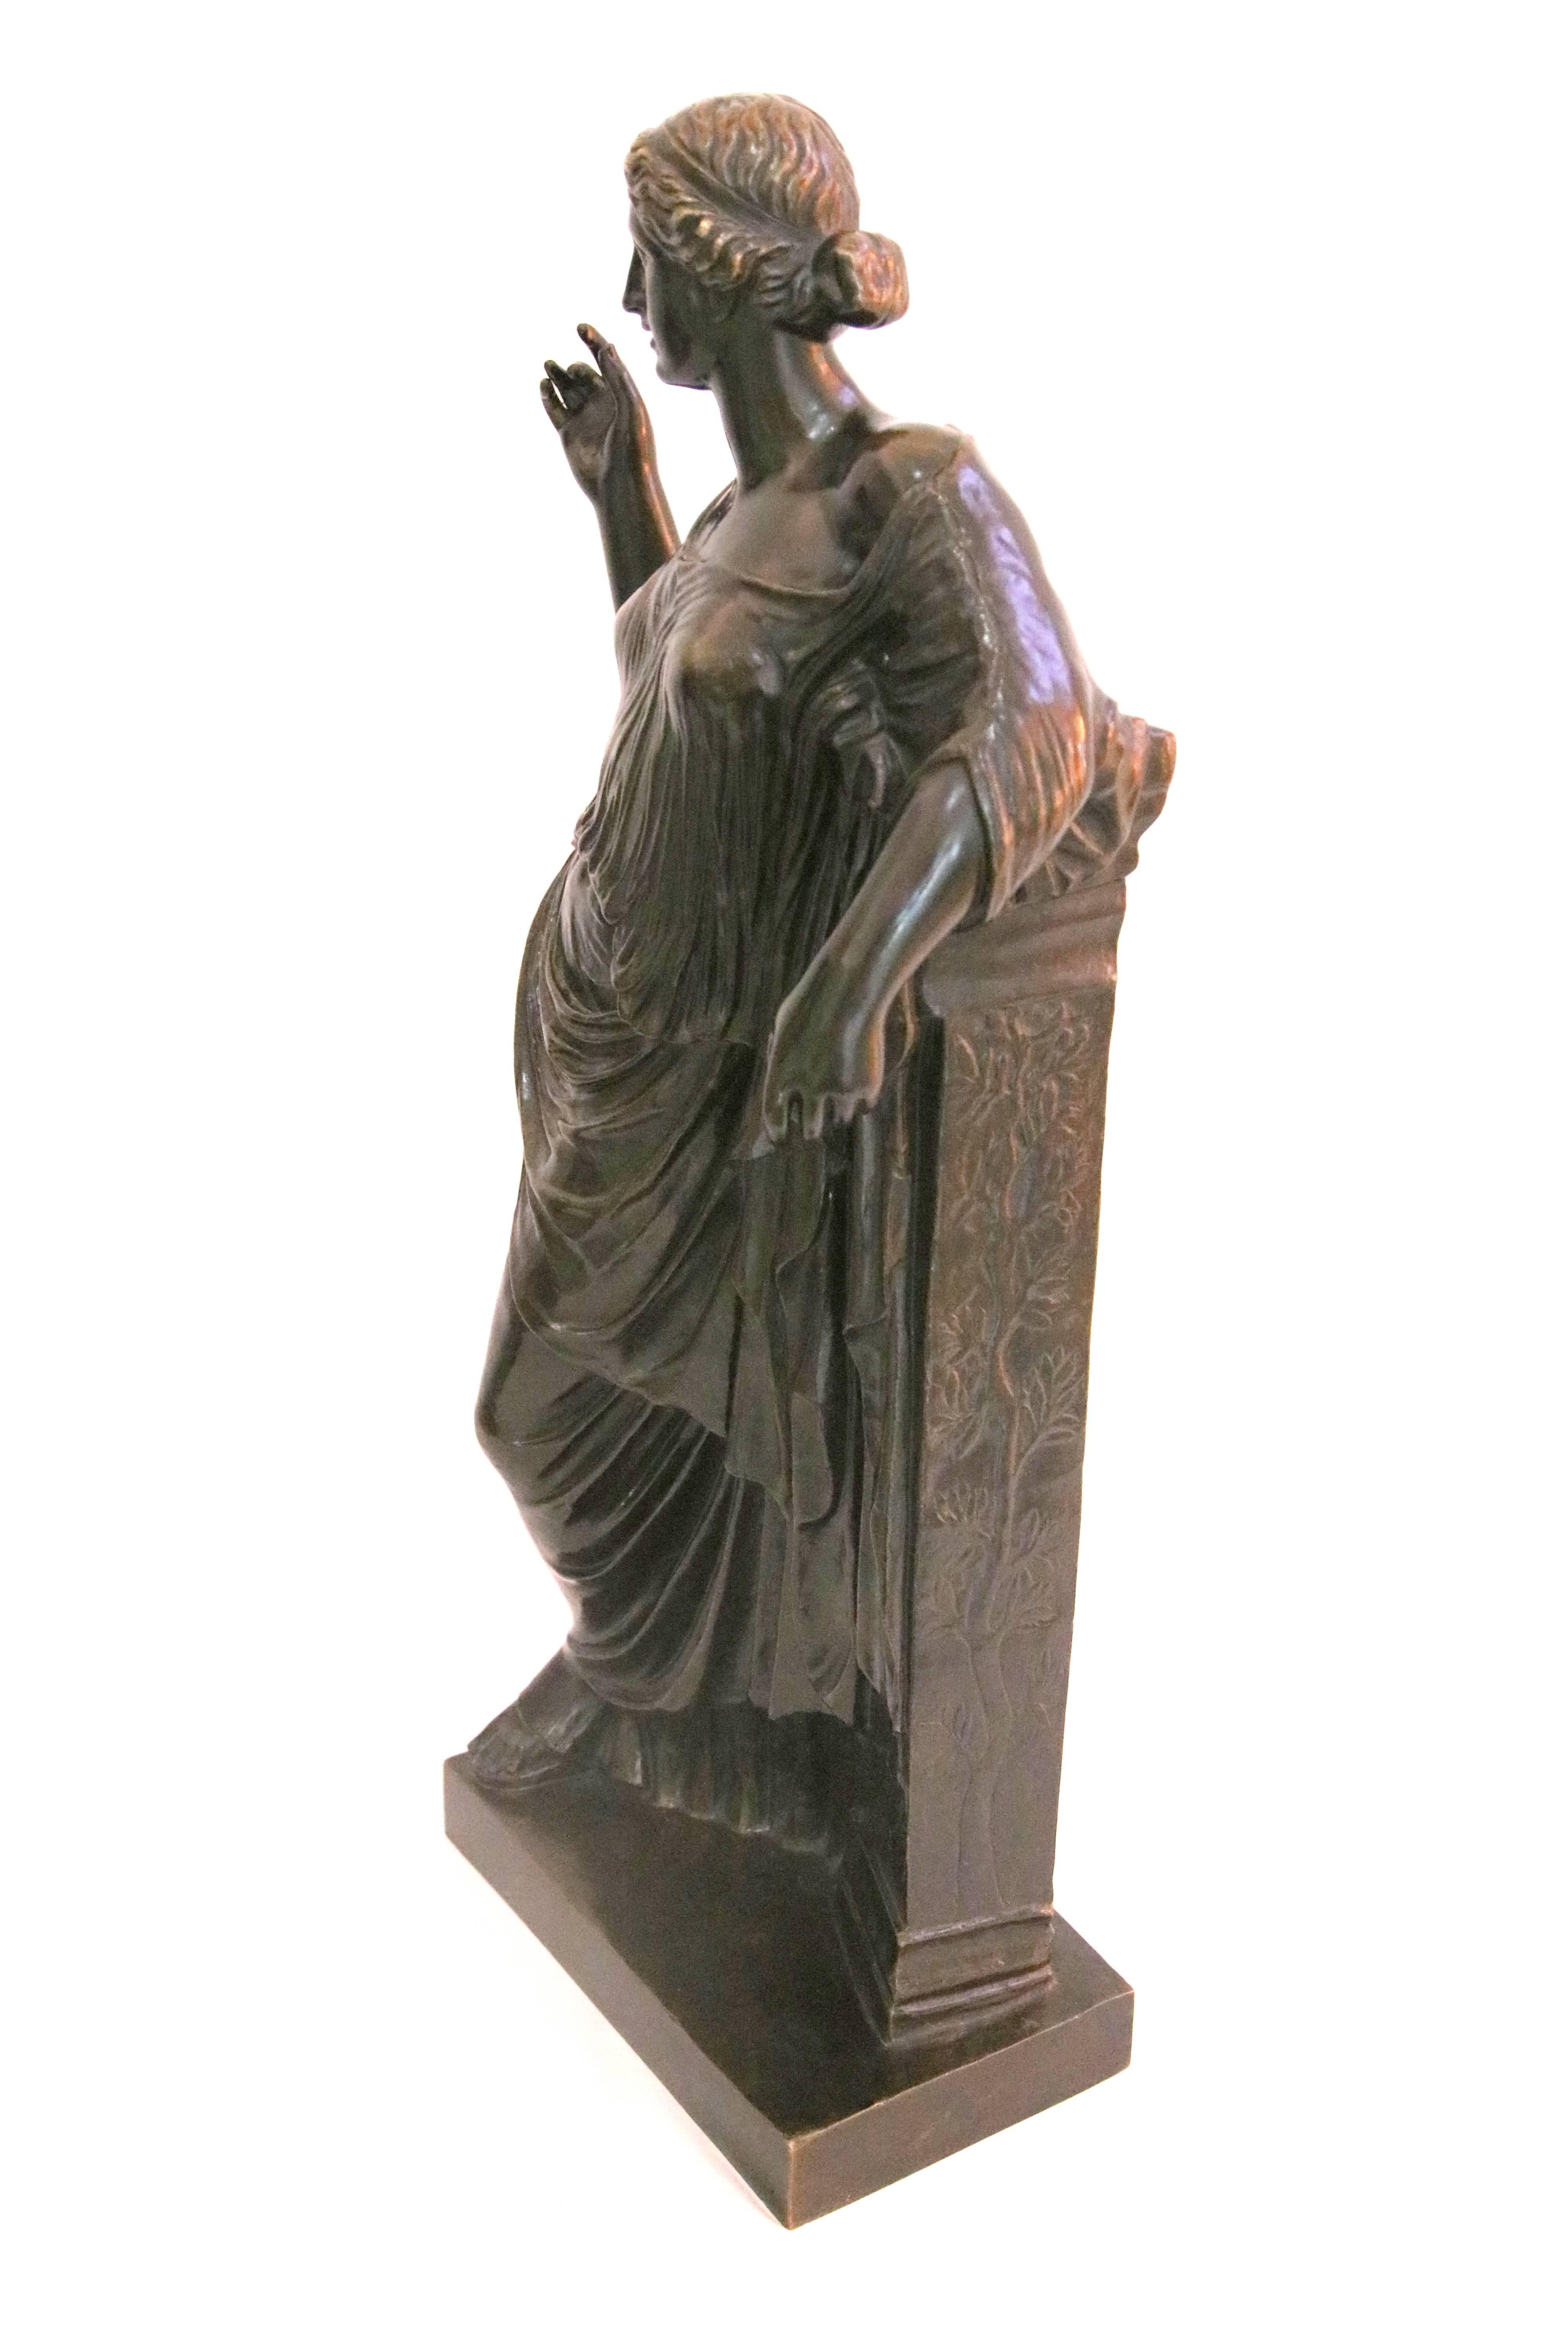 This bronze was produced by the firm of Susse Freres in France at the end of the 19th century during the 